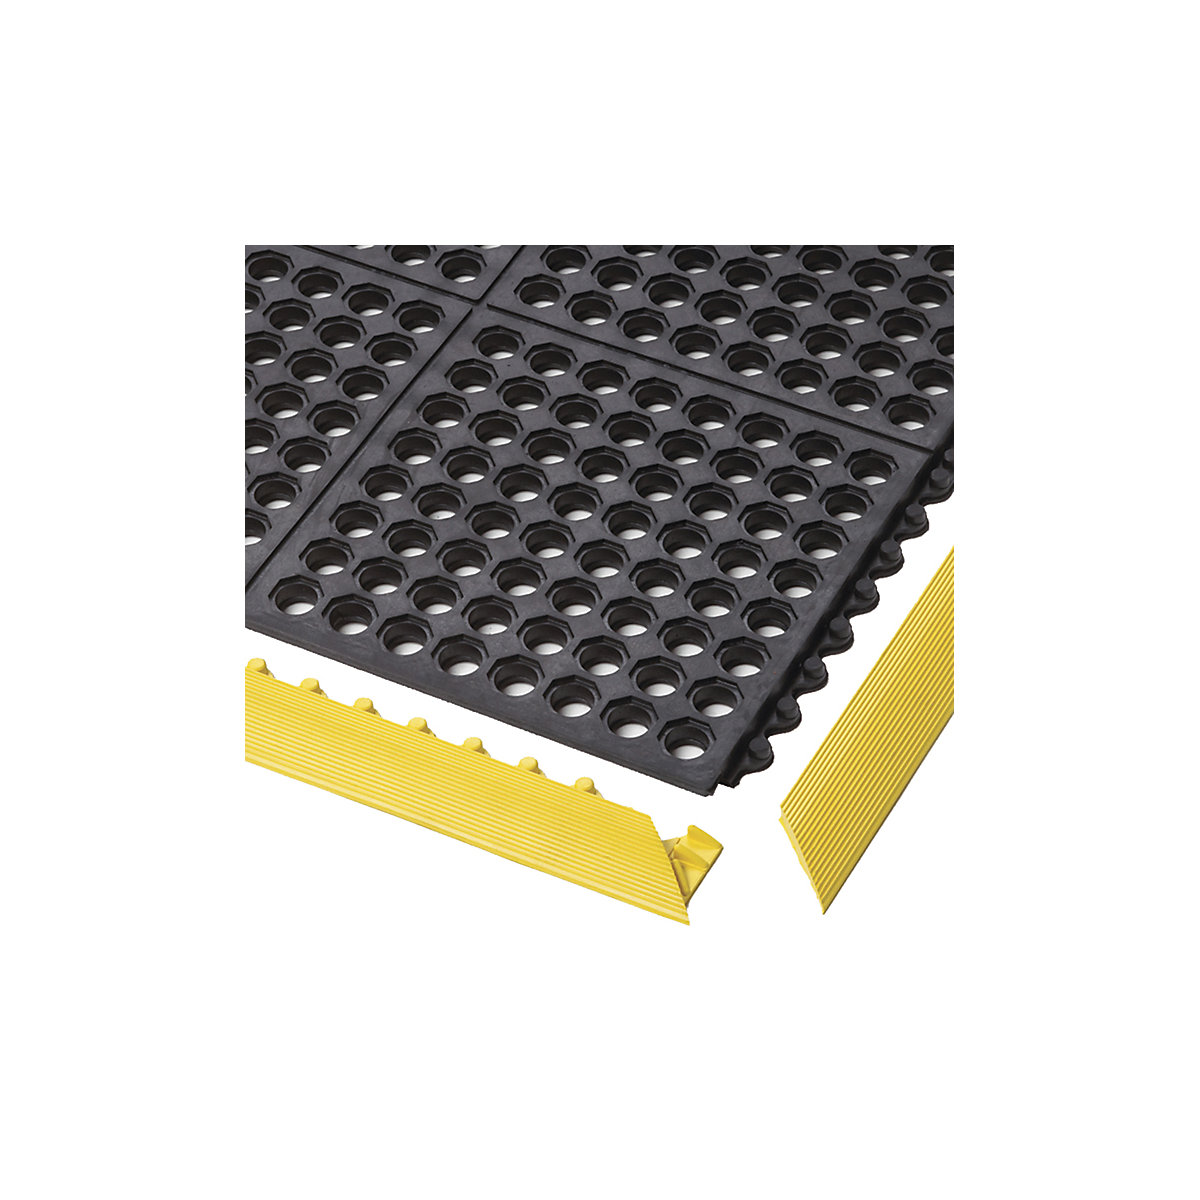 Cushion Ease™ perforated nitrile rubber plug-in system – NOTRAX